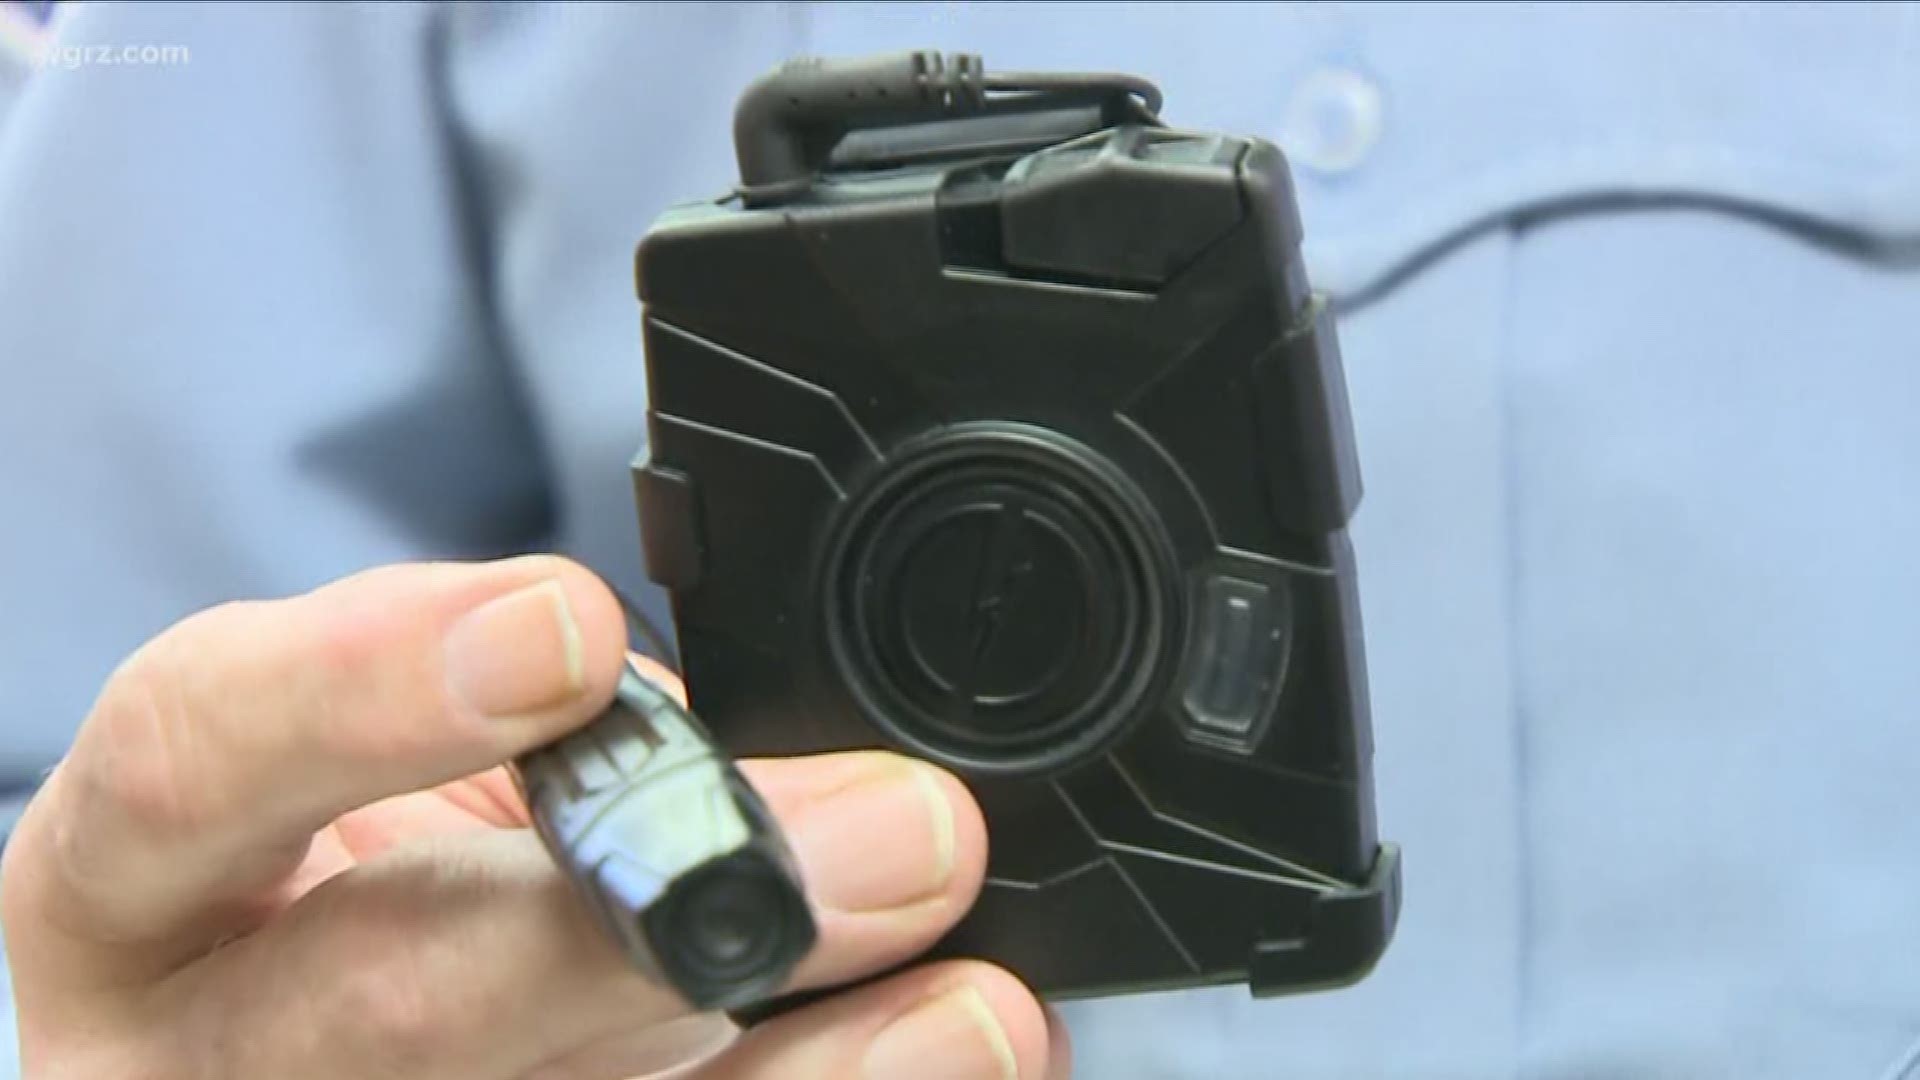 body camera footage is to show transparency, accountability and to build public trust